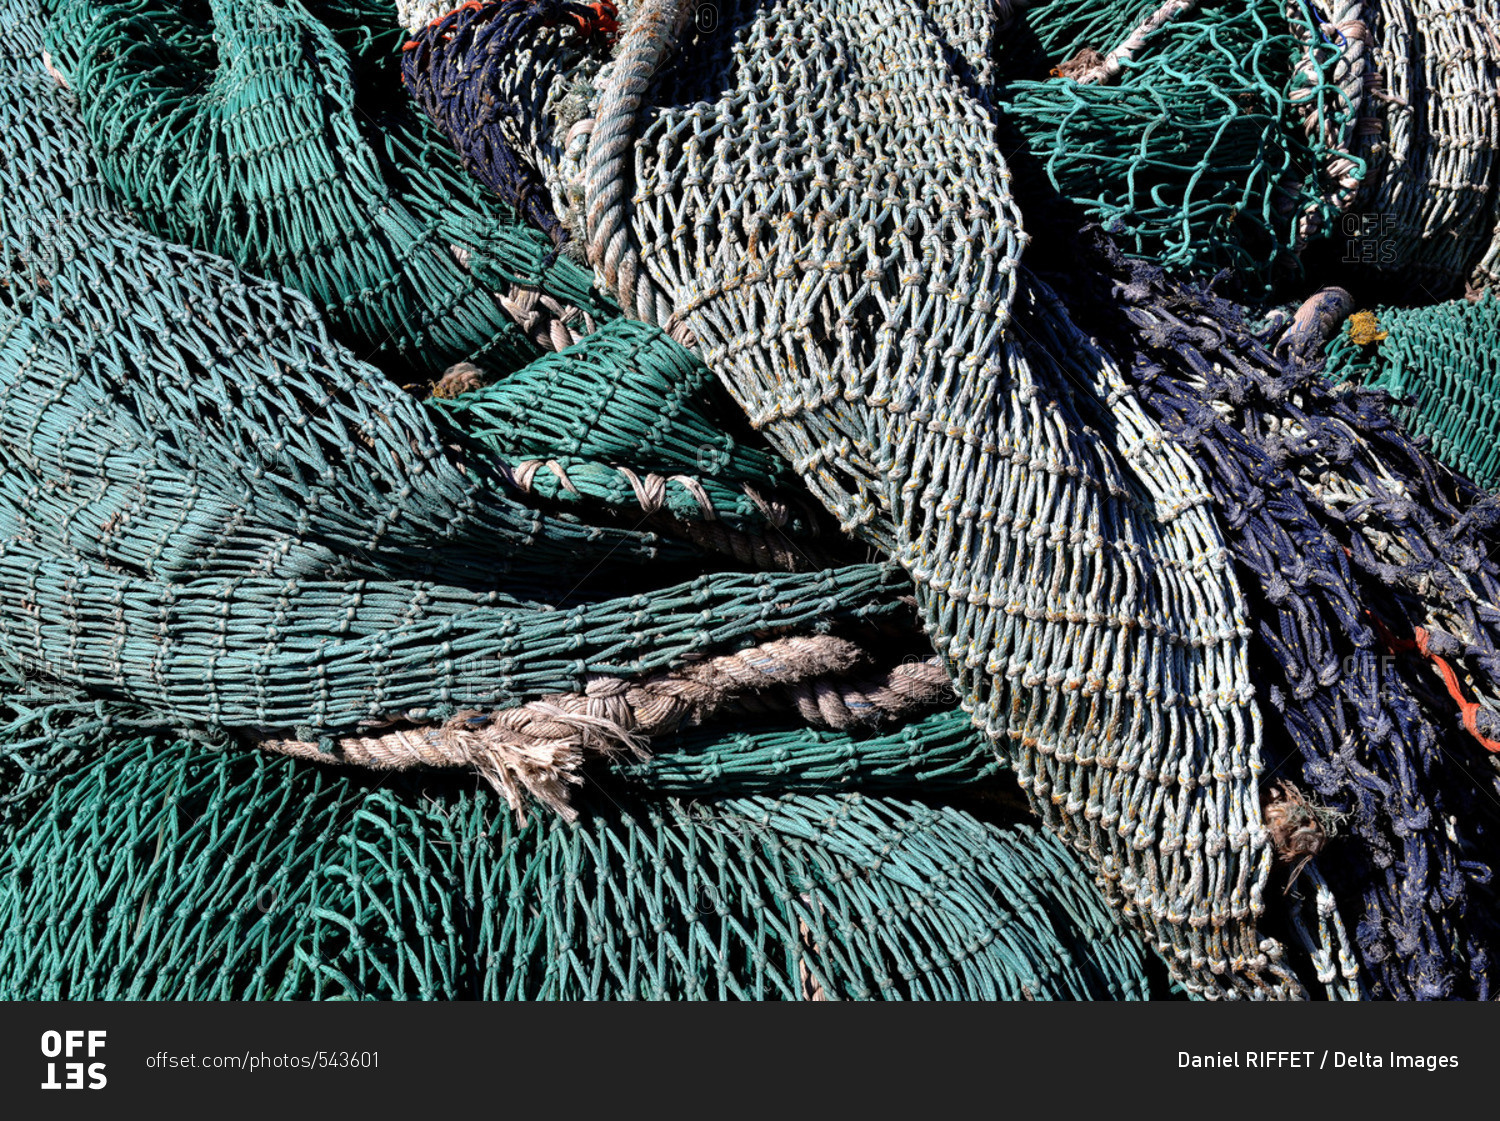 France, North-Western France, Brittany, Le Guilvinec, fishing port. Fishing nets for the trawlers